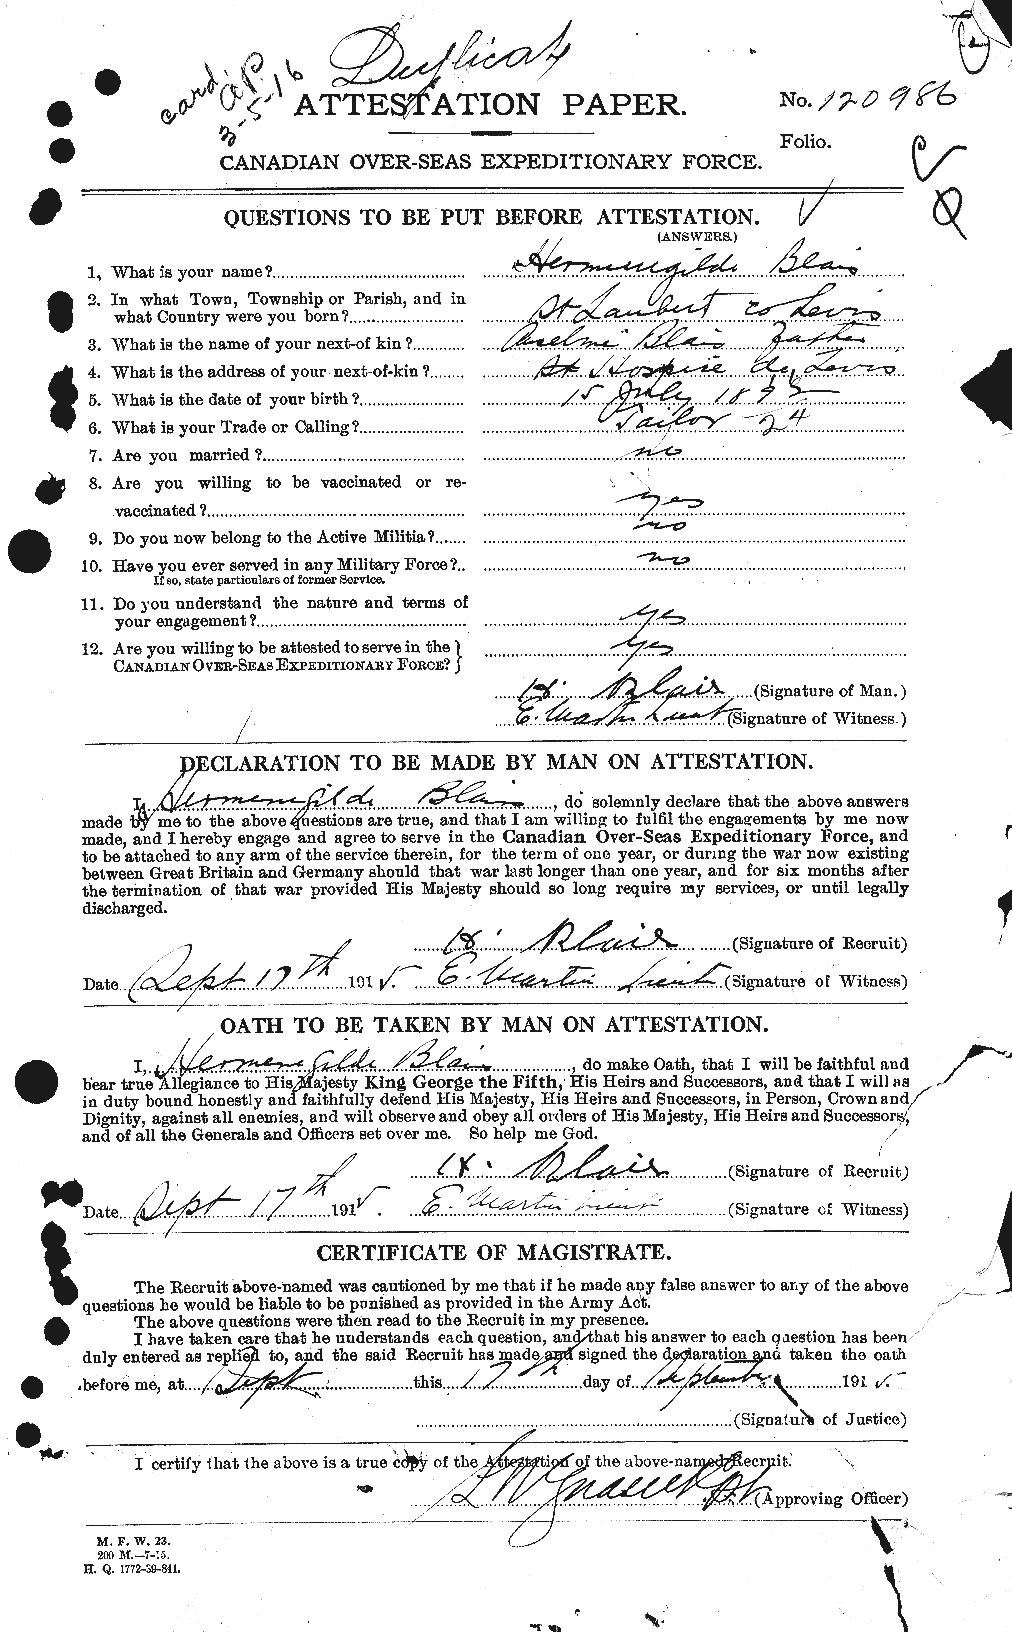 Personnel Records of the First World War - CEF 245438a